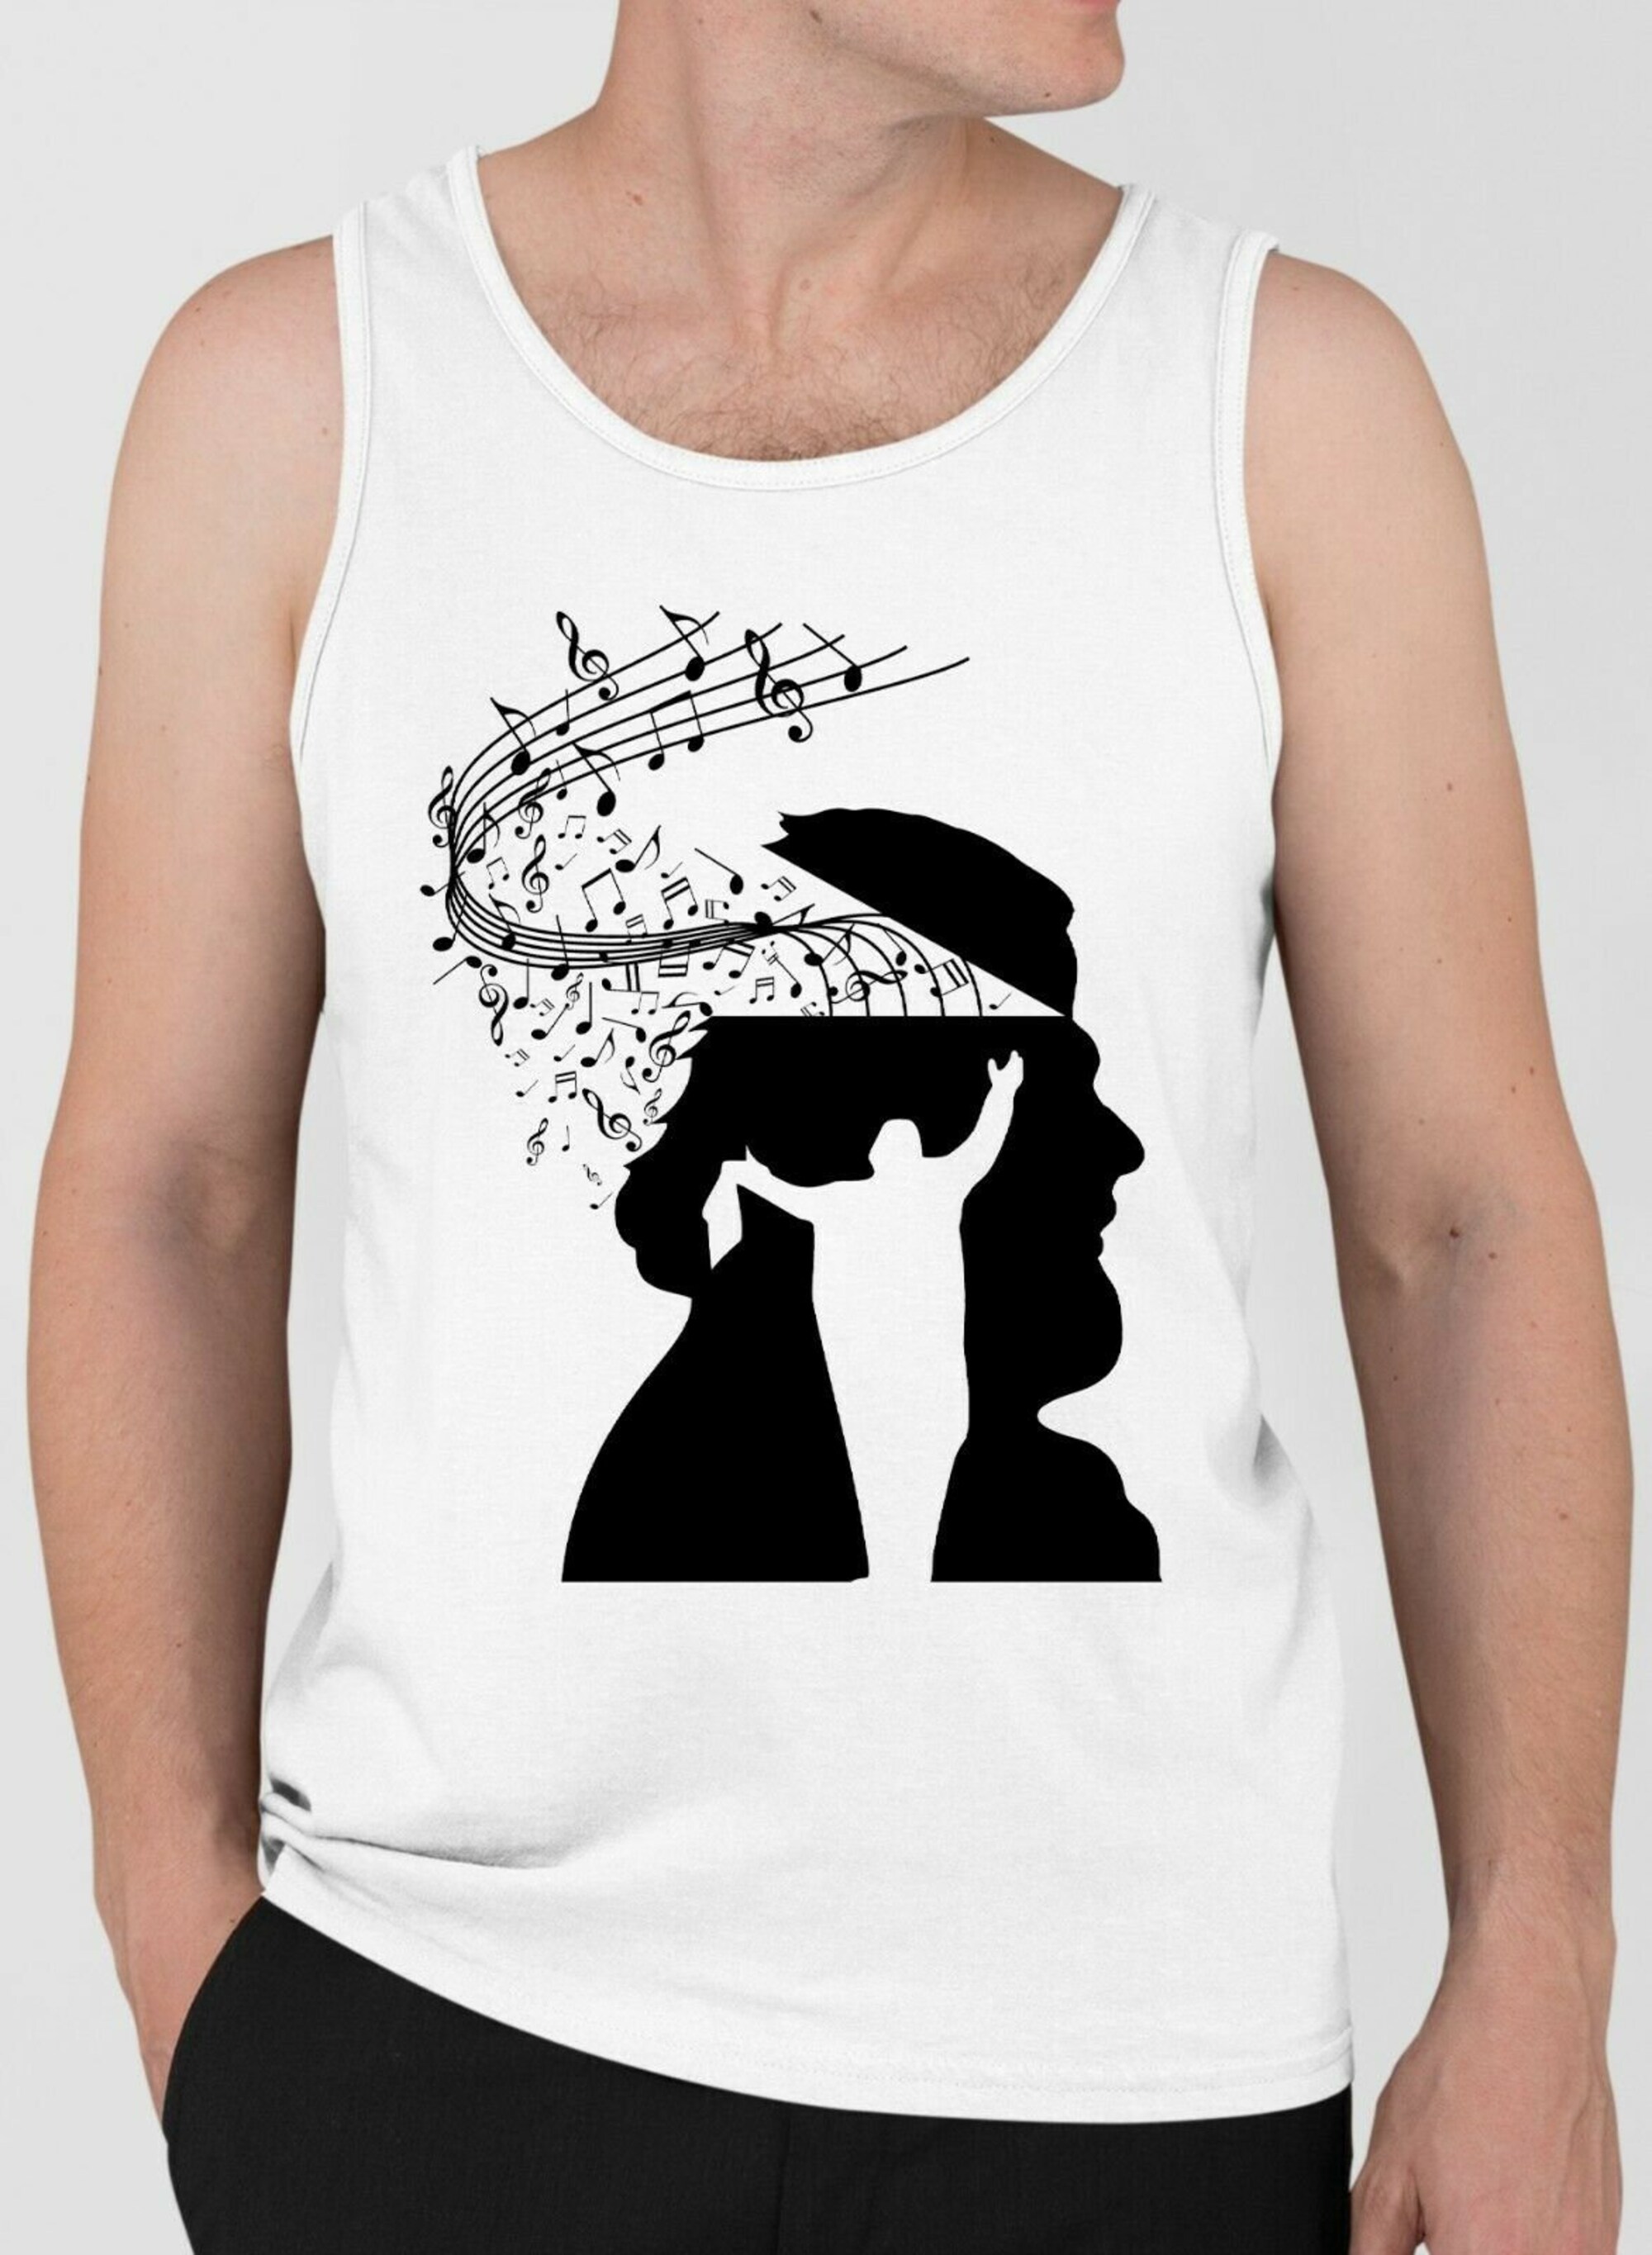 Discover Composer Music Tank Top | Screen Printed Vest